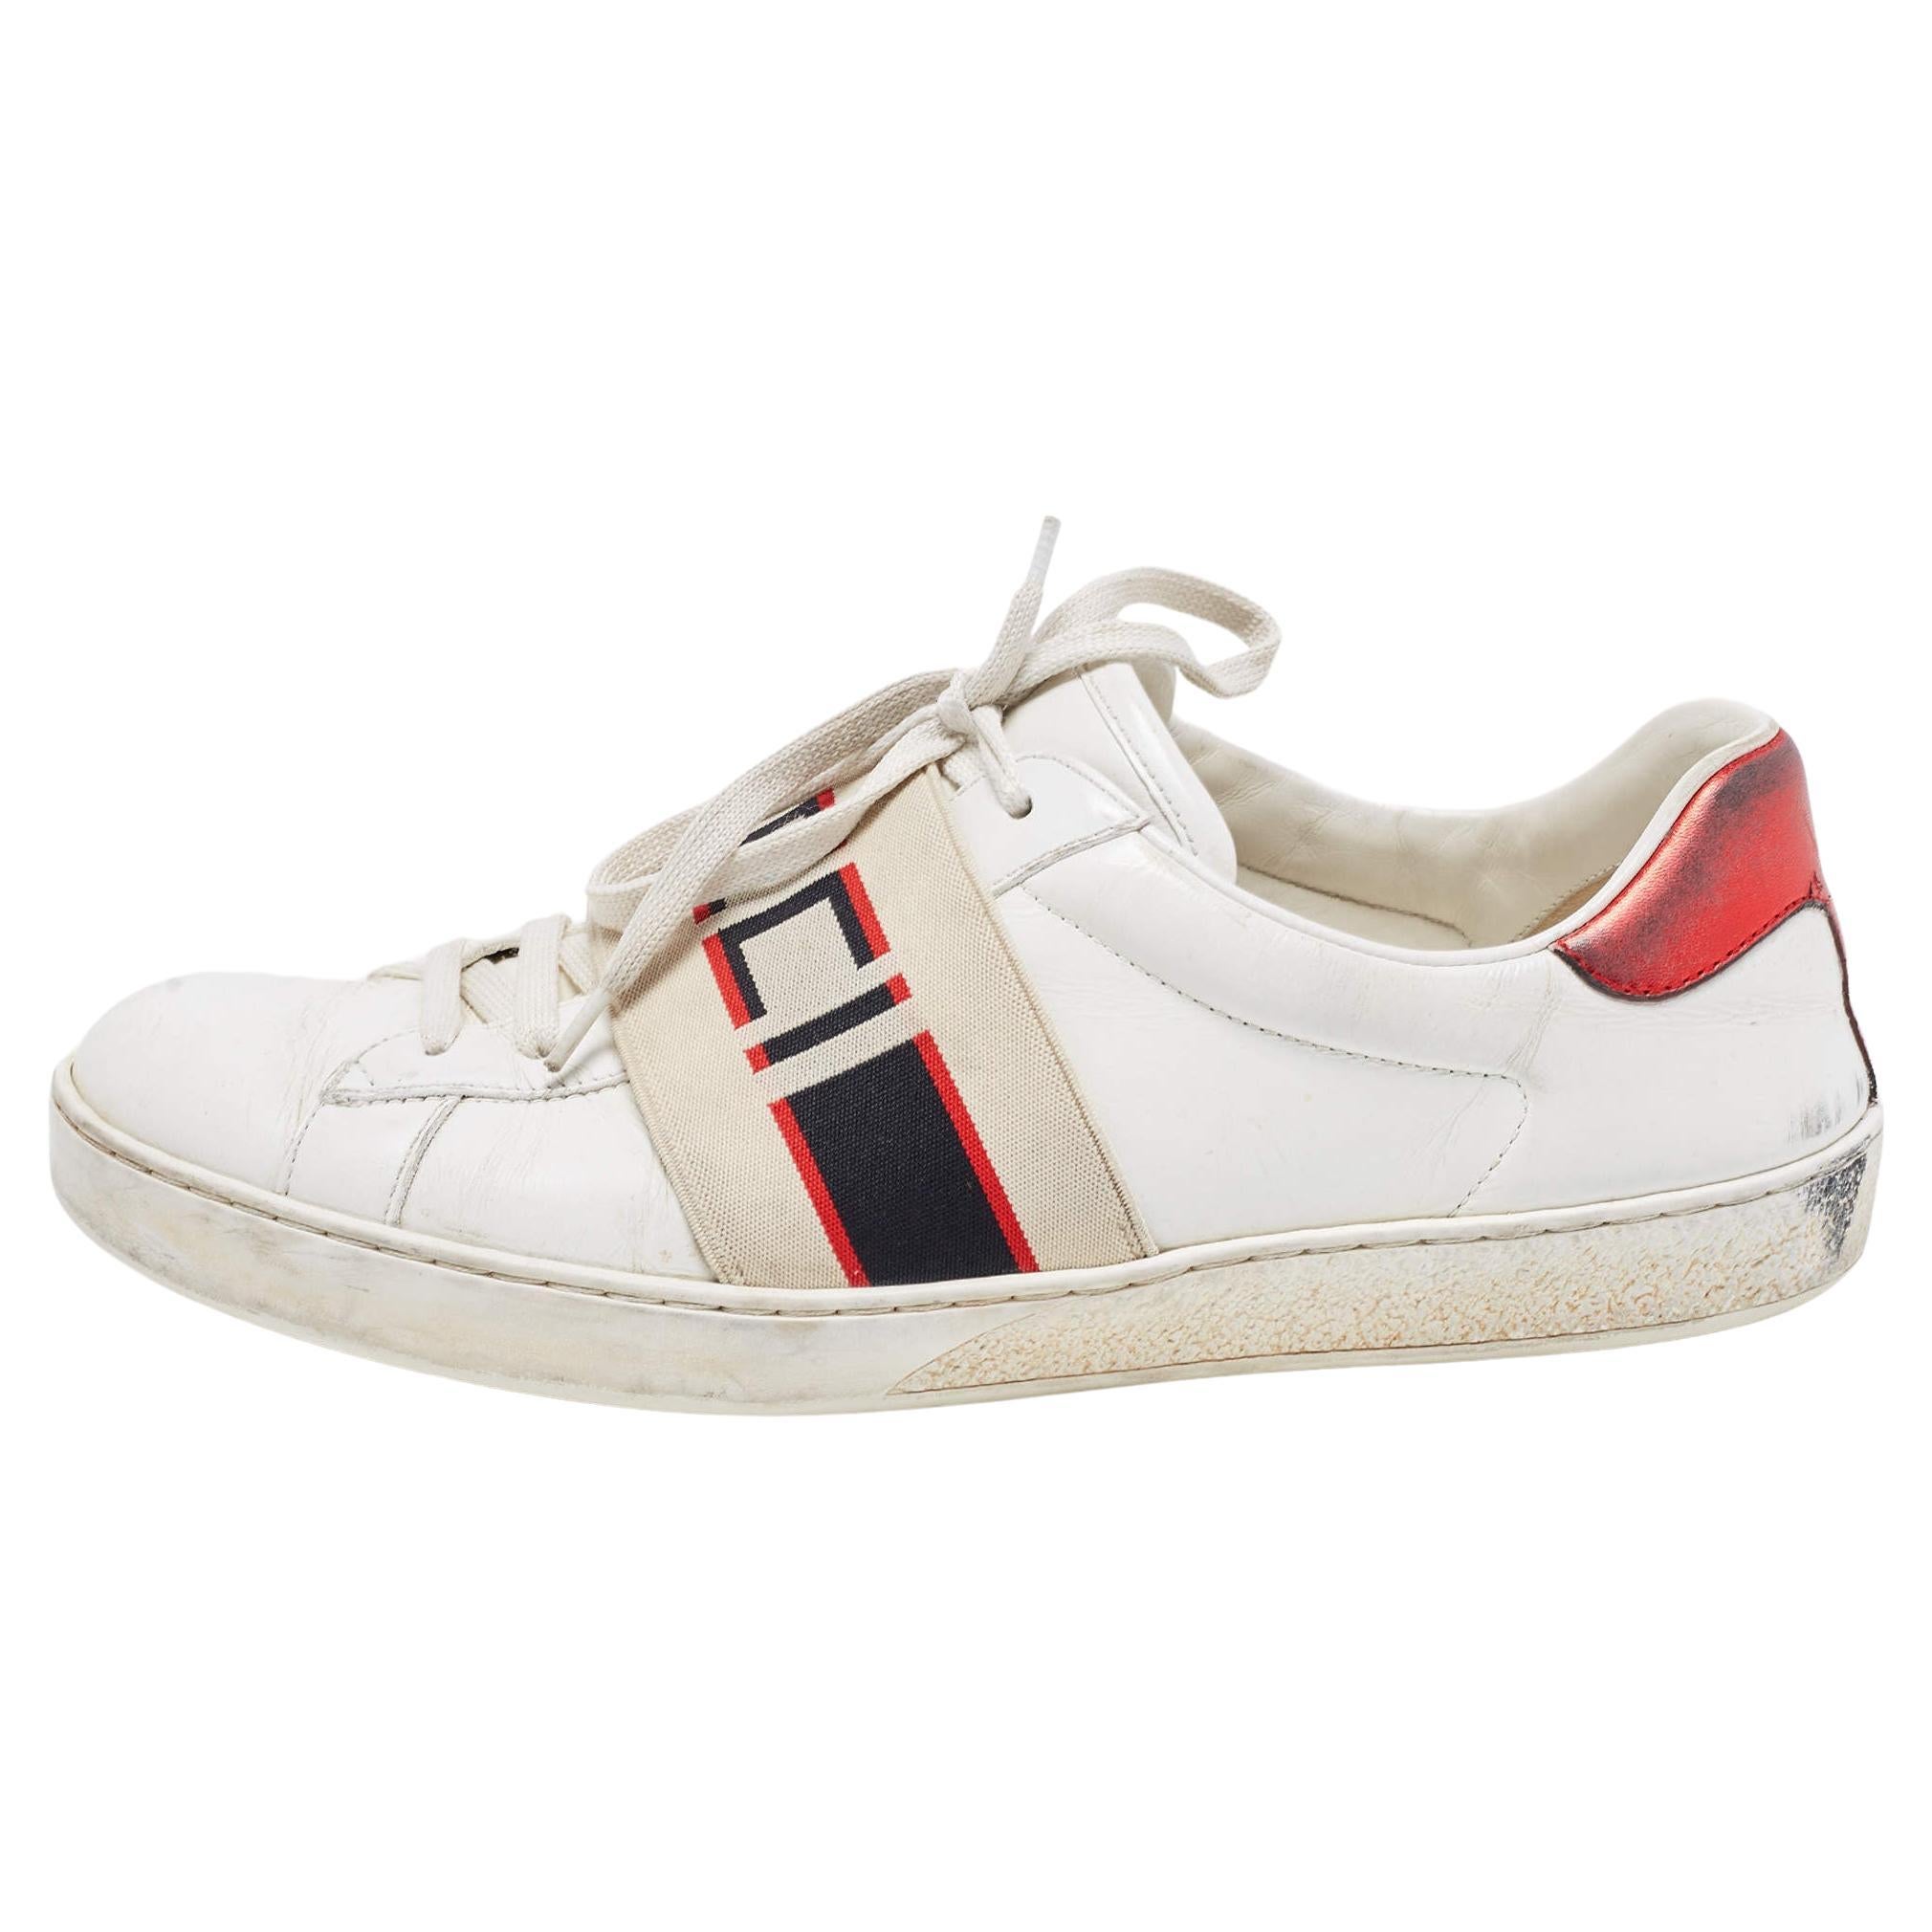 Gucci White Leather Logo Band Ace Sneakers Size 41.5 For Sale